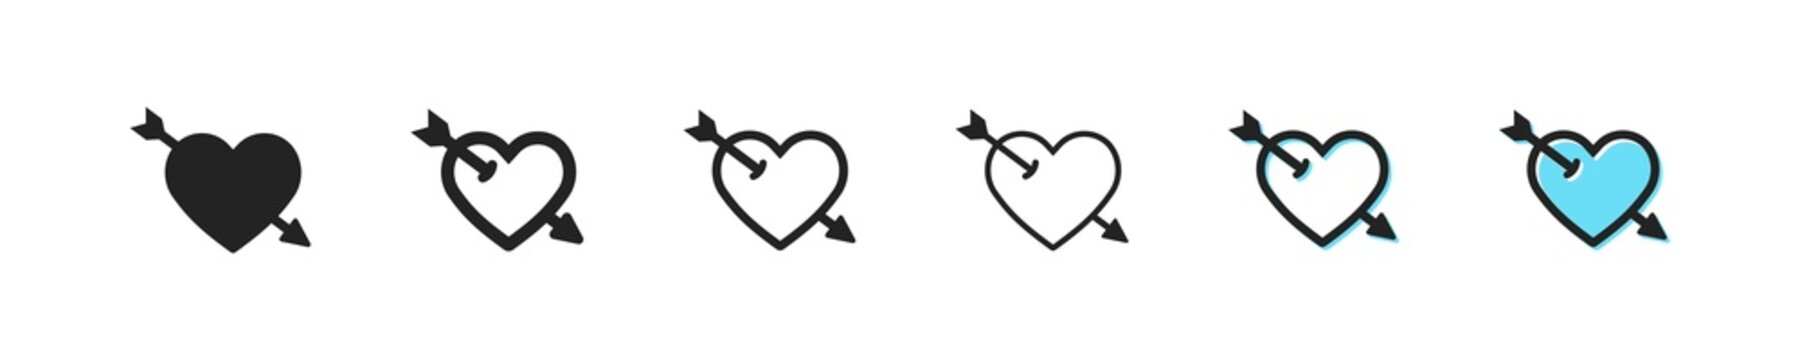 Pierced heart icon. Heart with arrow vector symbol. Simple cupid's arrow outline icons. Pierced hearts icons set. Flat web icon.